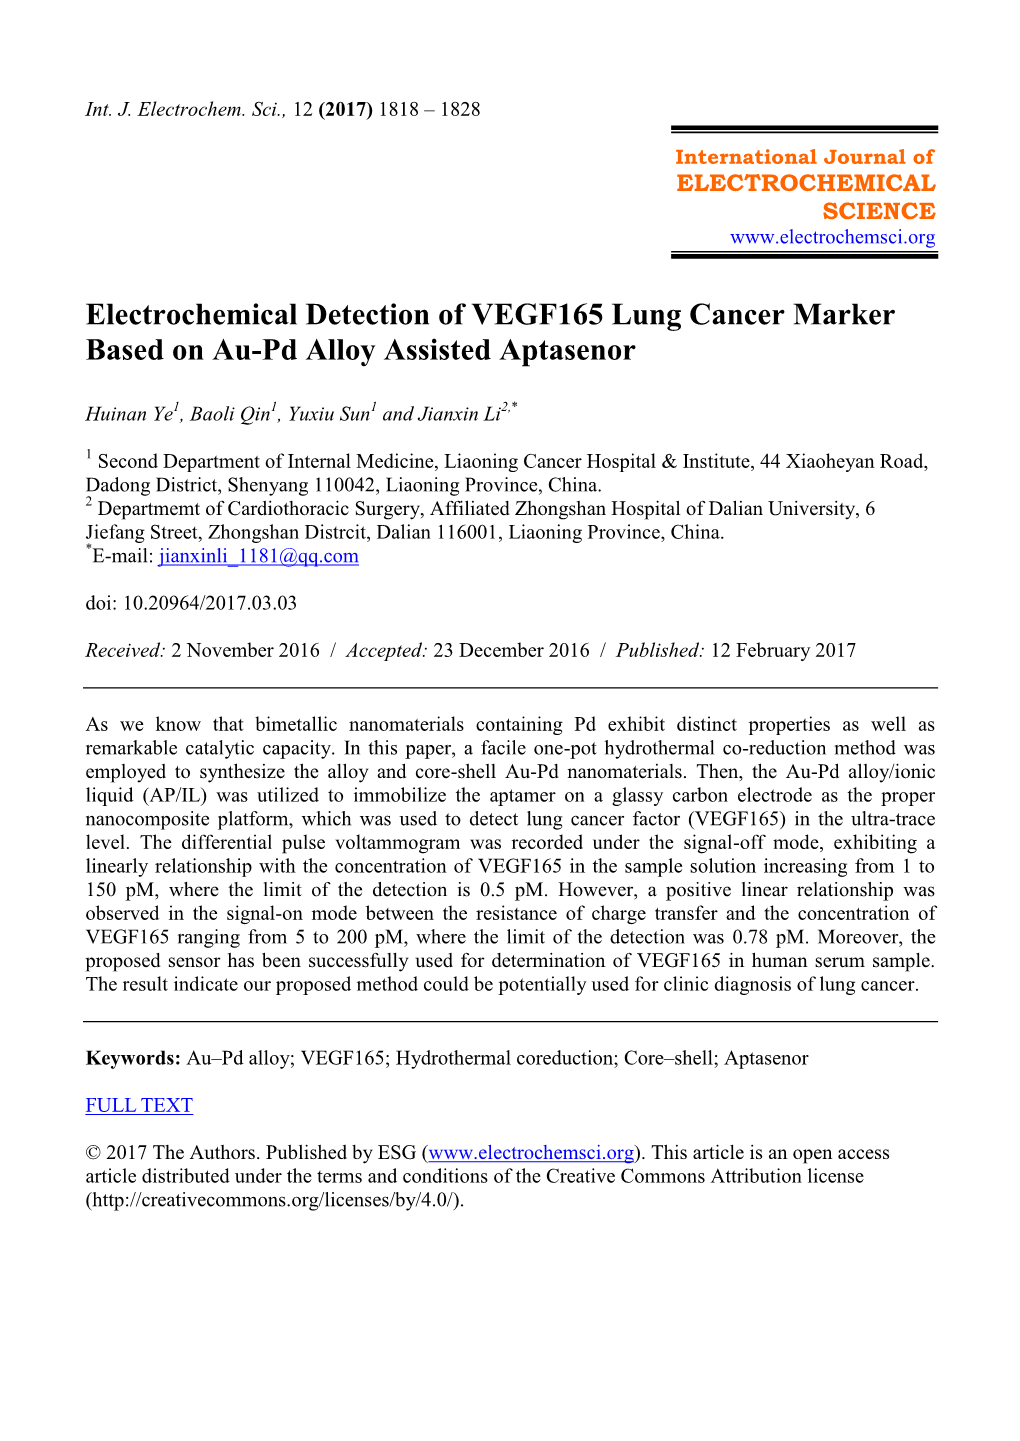 Electrochemical Detection of VEGF165 Lung Cancer Marker Based on Au-Pd Alloy Assisted Aptasenor